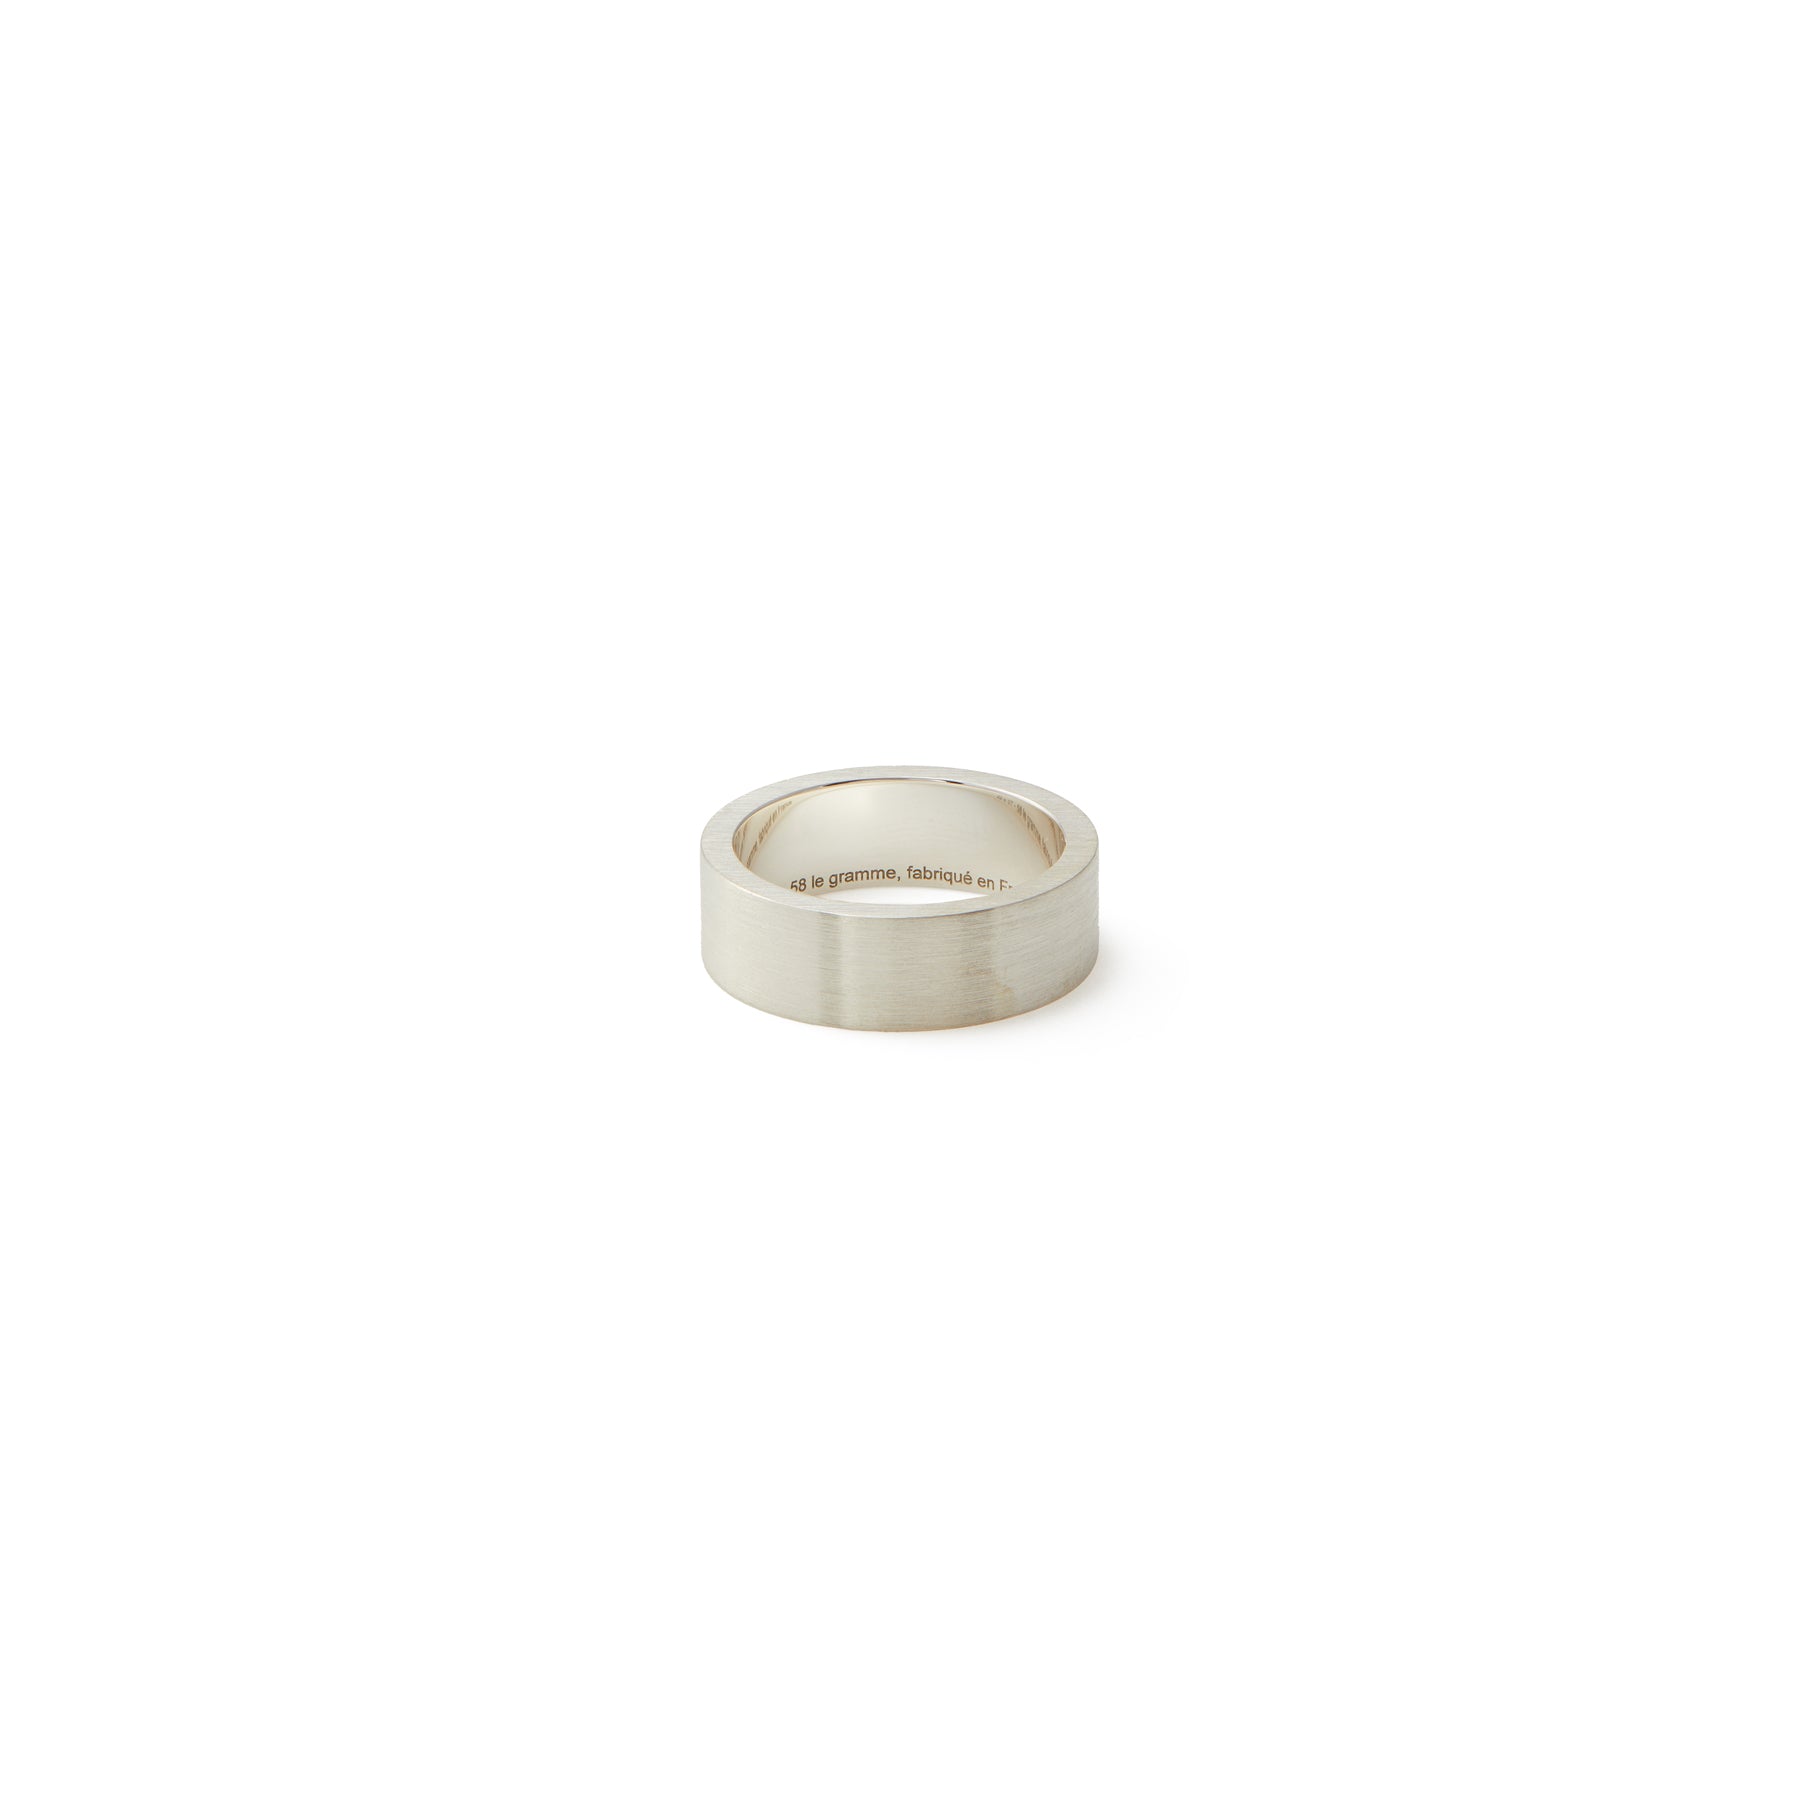 Le Gramme 9g Brushed Sterling Silver Ribbon Ring (Silver Slick)